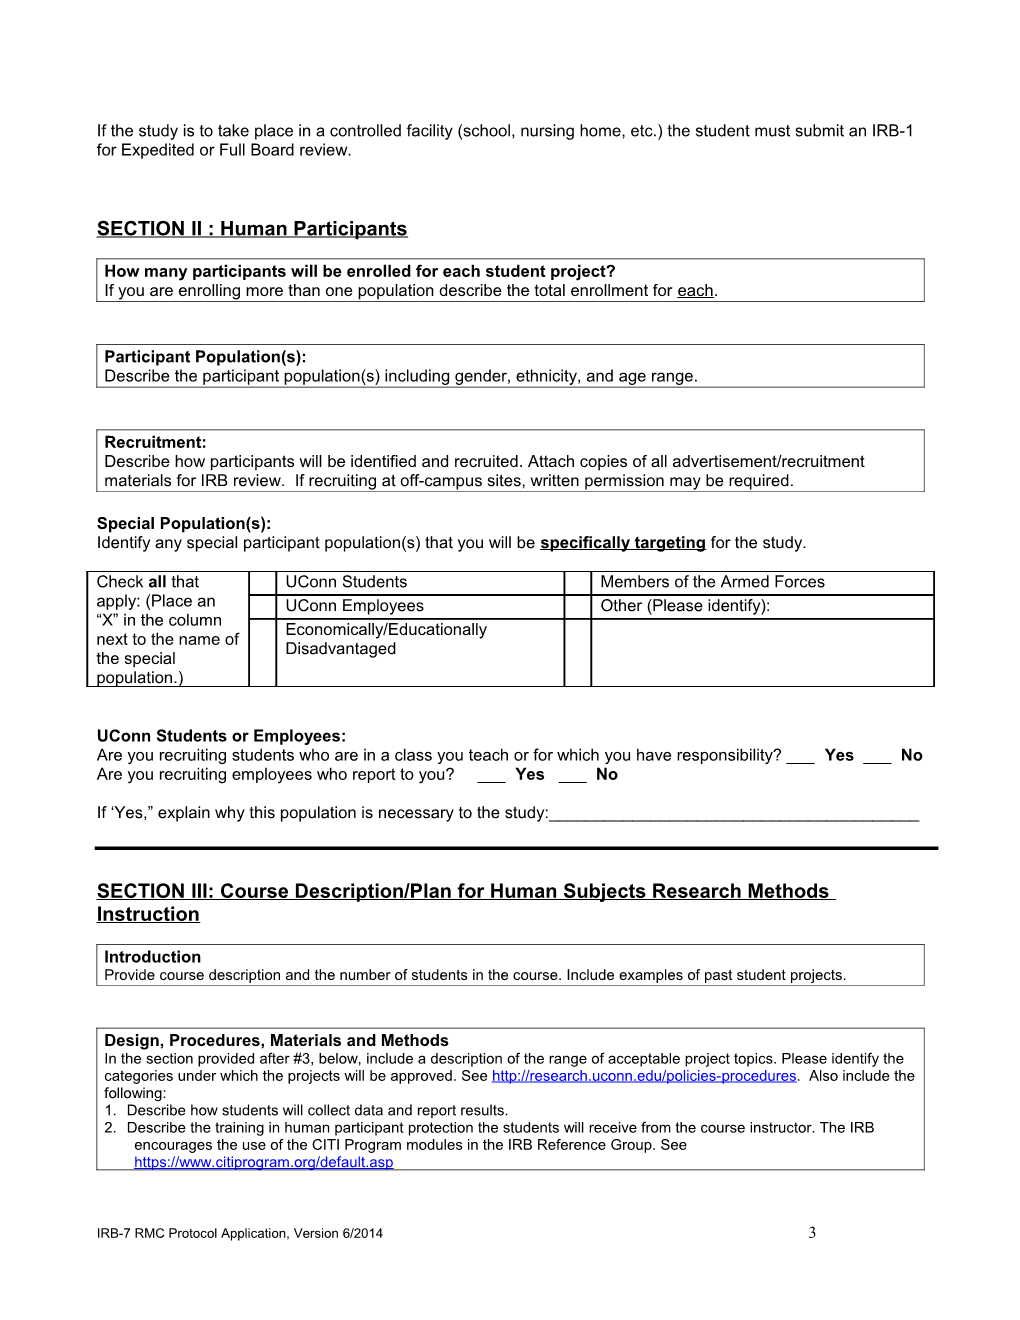 Instructions for Completing the IRB-7 Protocol Application Form